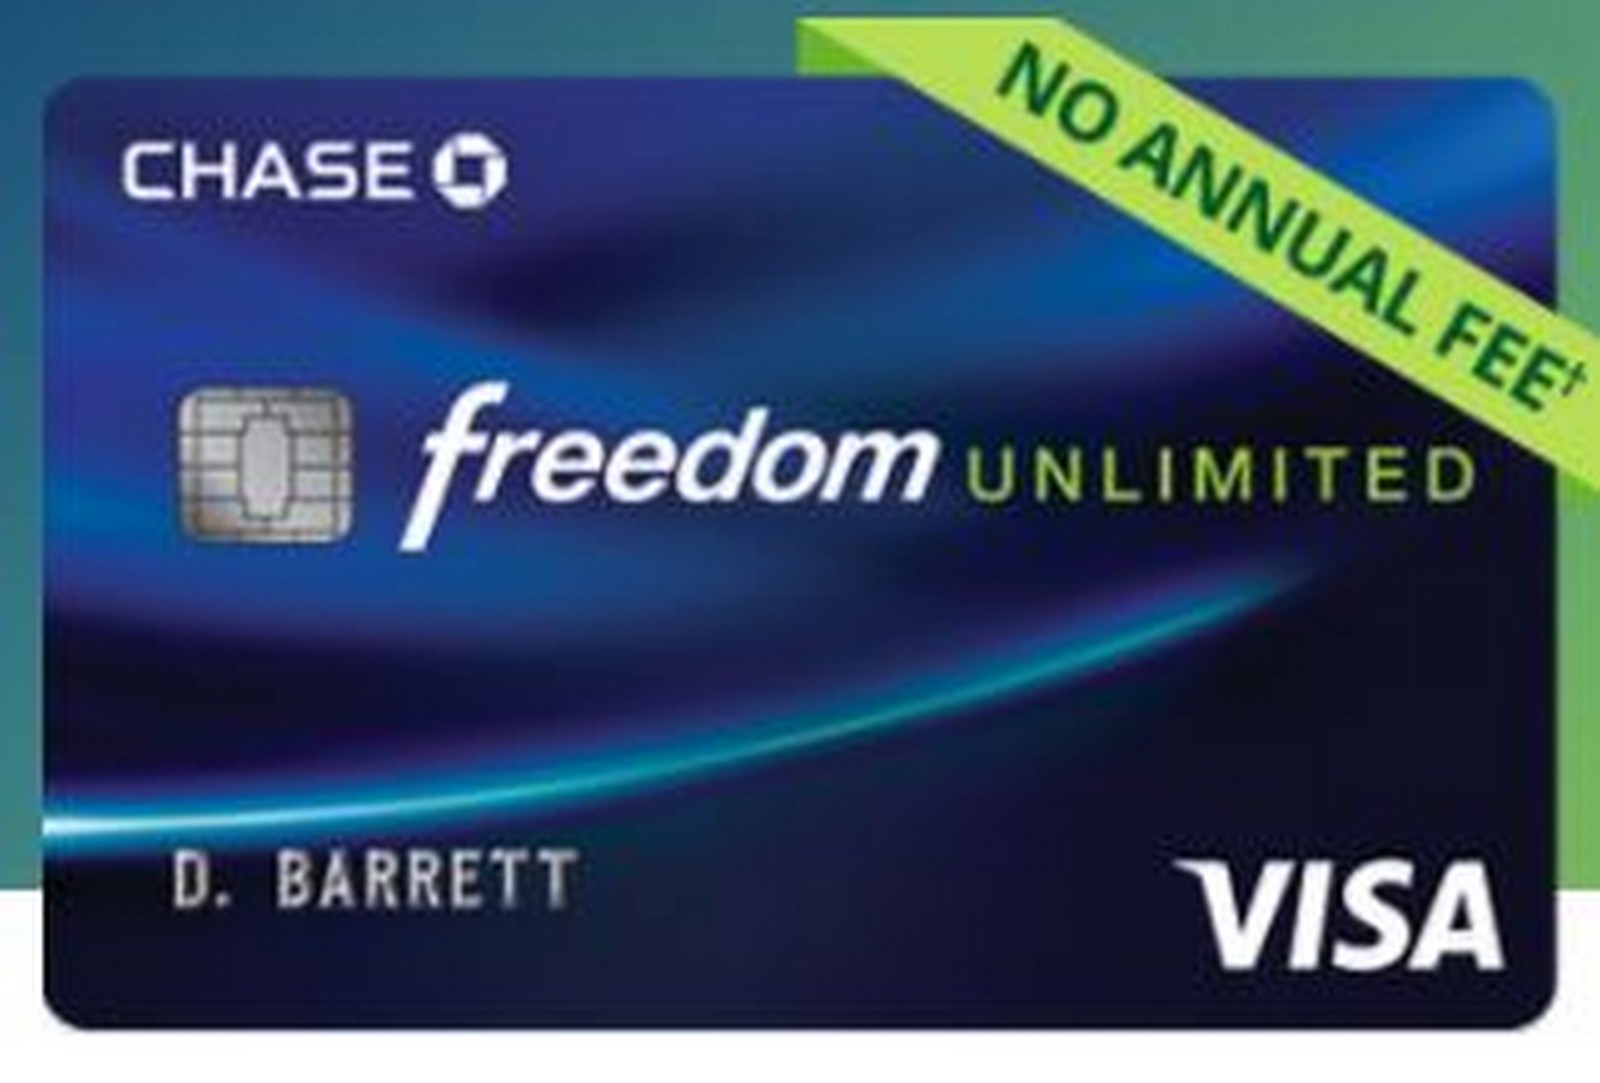 Chase Freedom Unlimited 3x offer